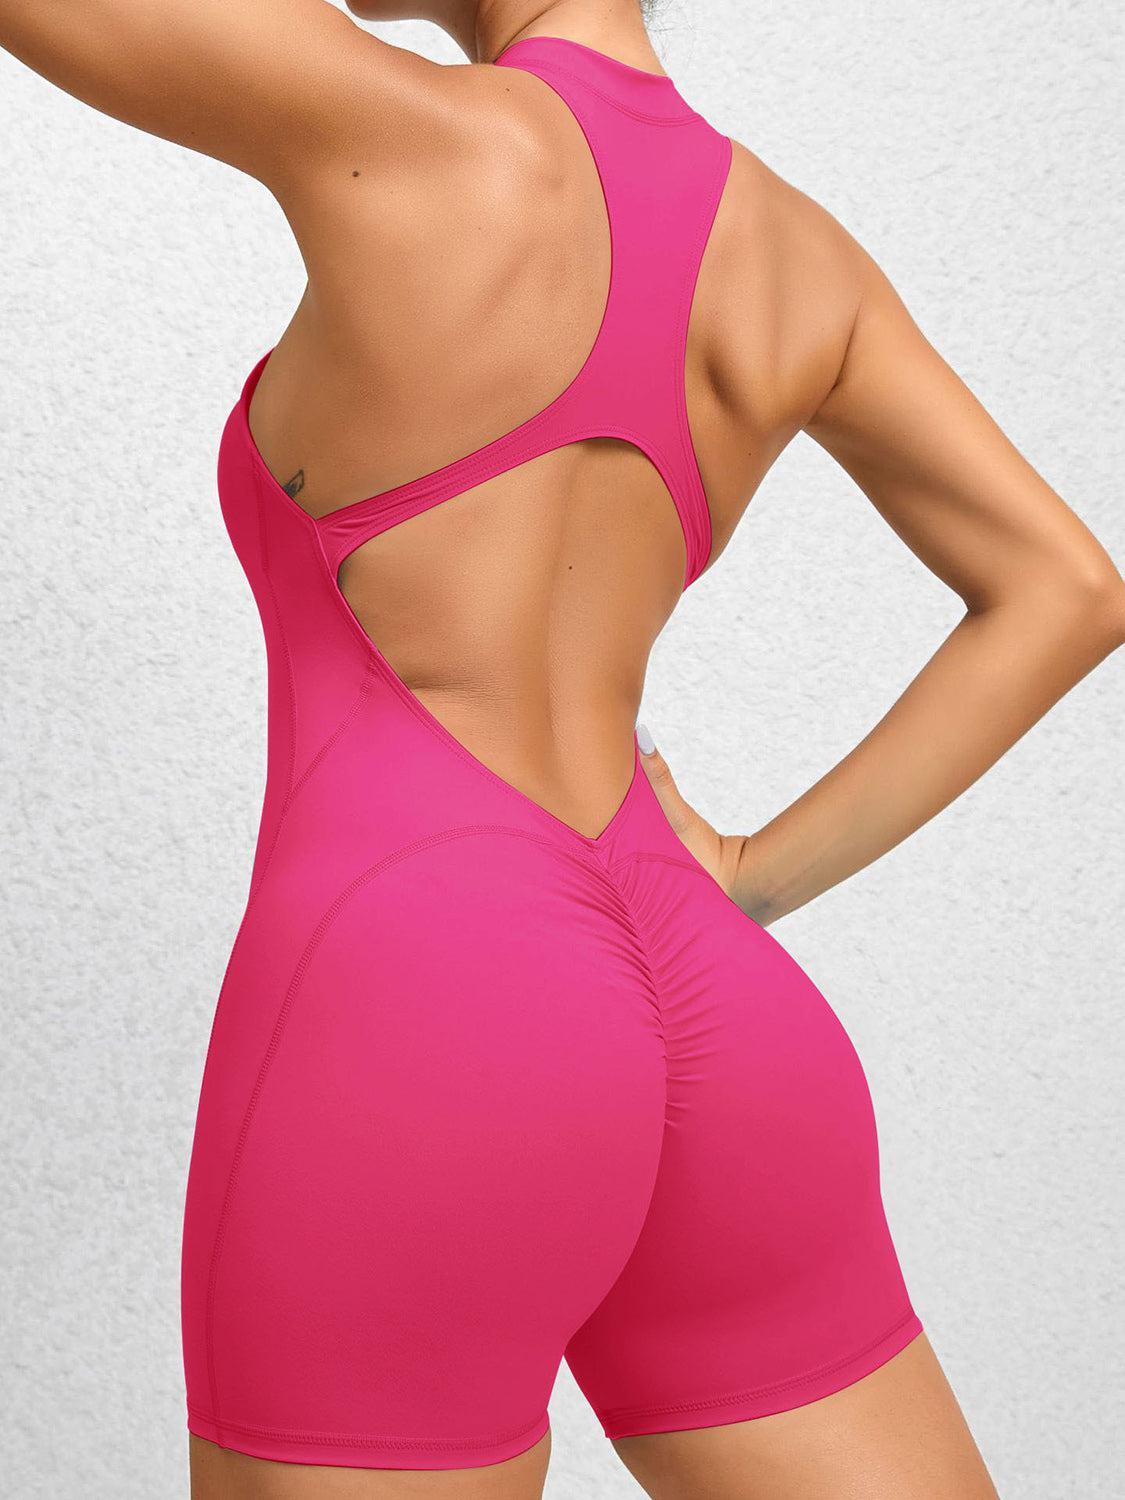 the back of a woman in a pink sports suit